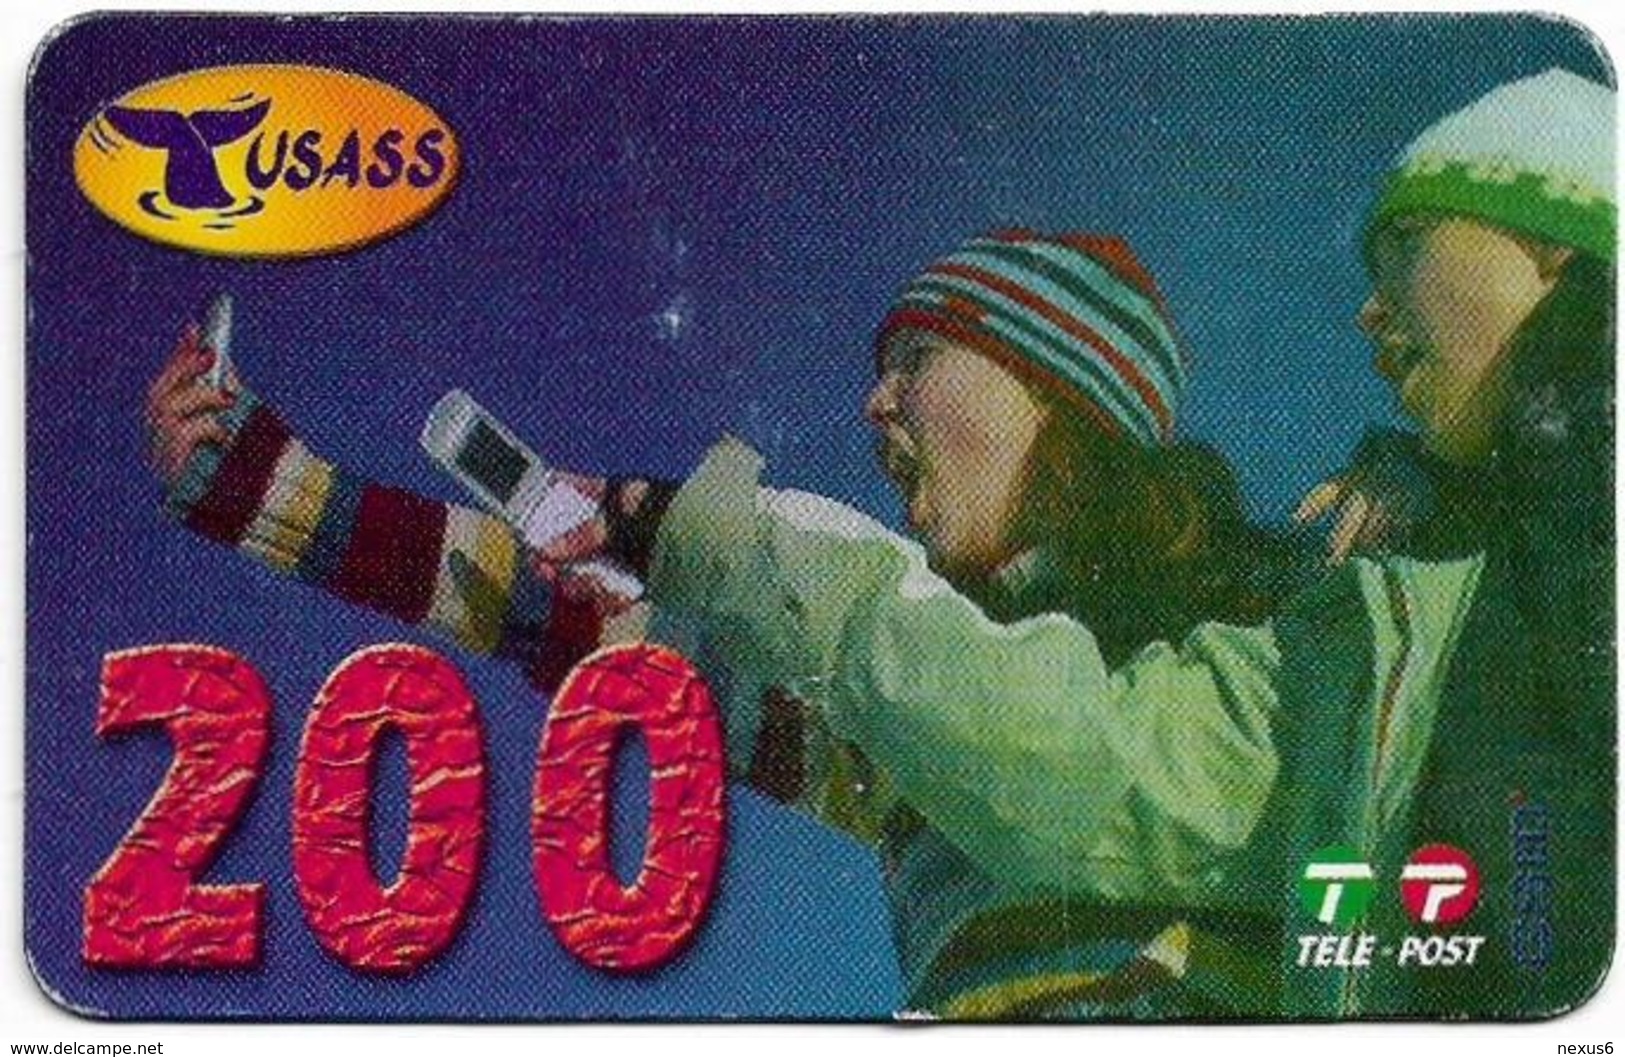 Greenland - Tusass - Two Girls With Mobile, GSM Refill, 200kr. Exp. 01.10.2006, Used - Groenlandia